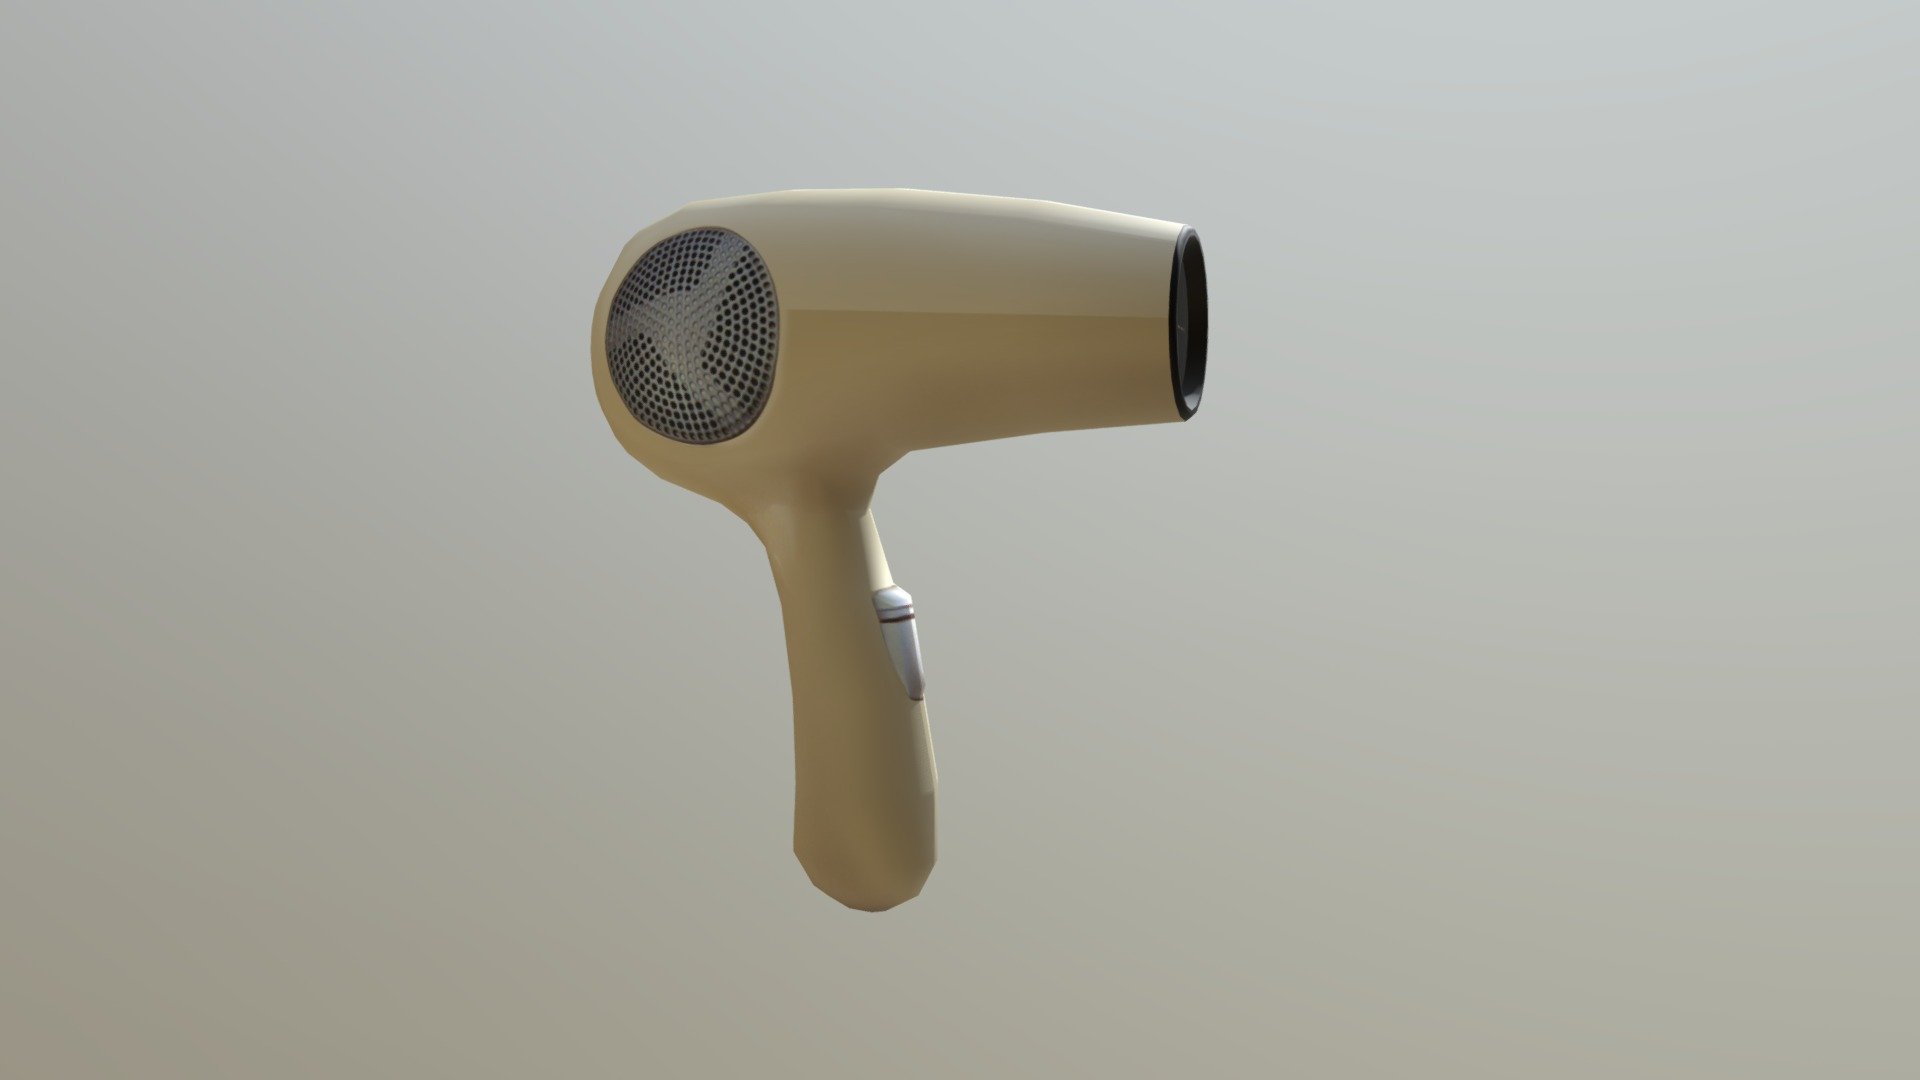 Low-poly hair dryer. Texture size 1024x1024. Game engine ready 3d model